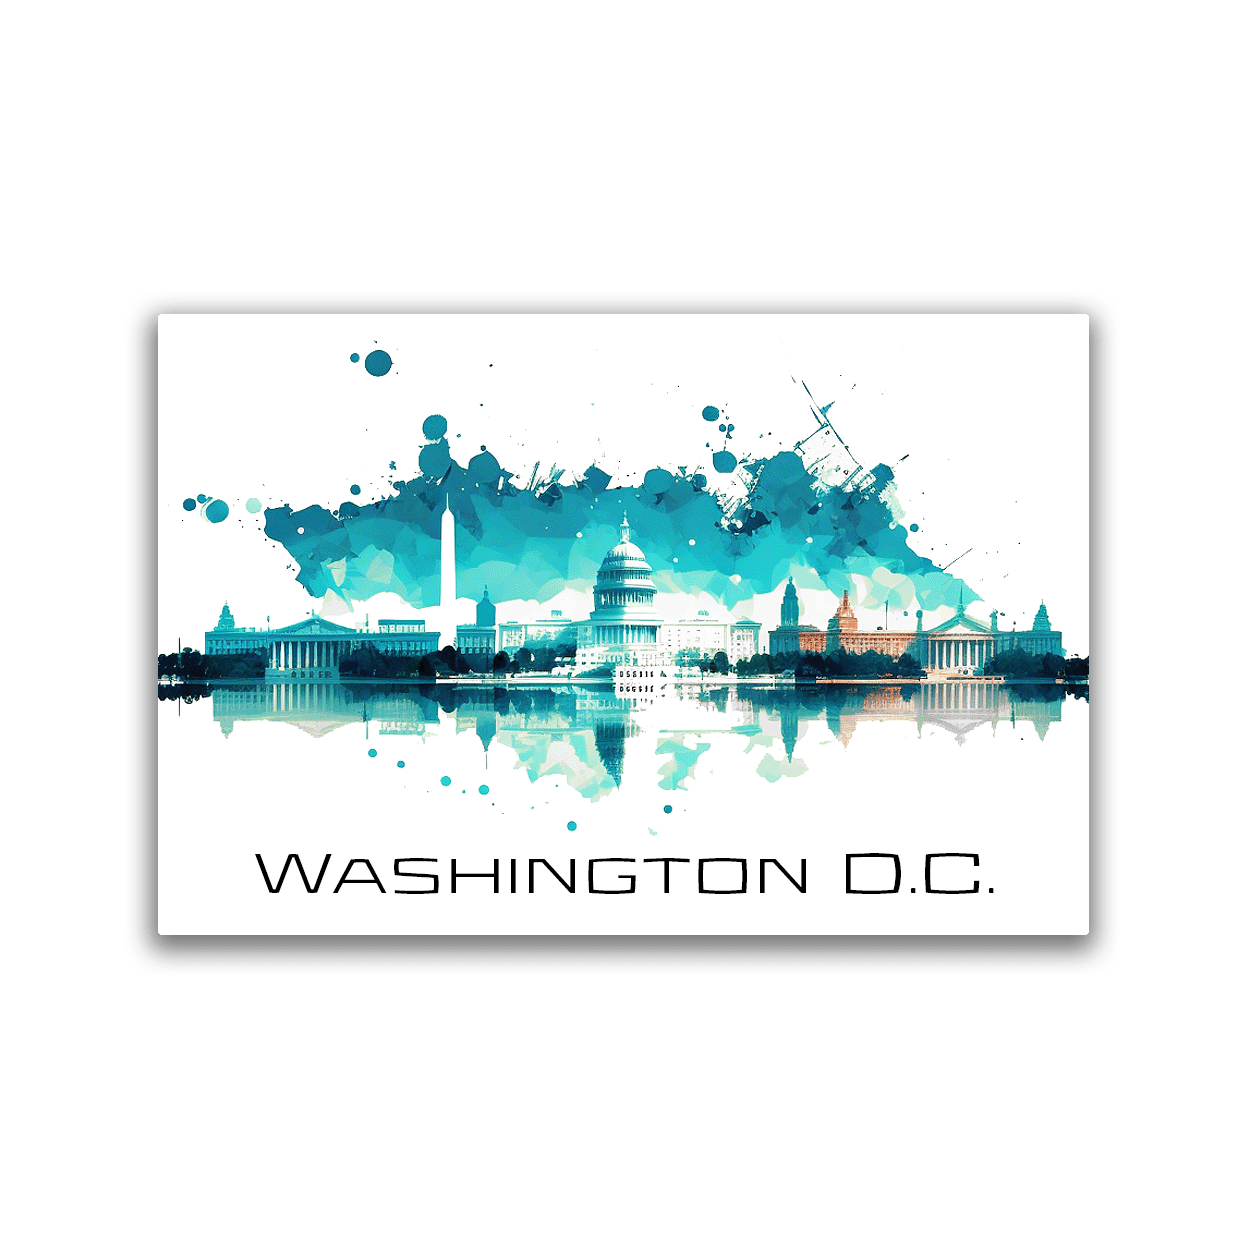 2x3 colorful magnet with image of the Washington D.C. skyline